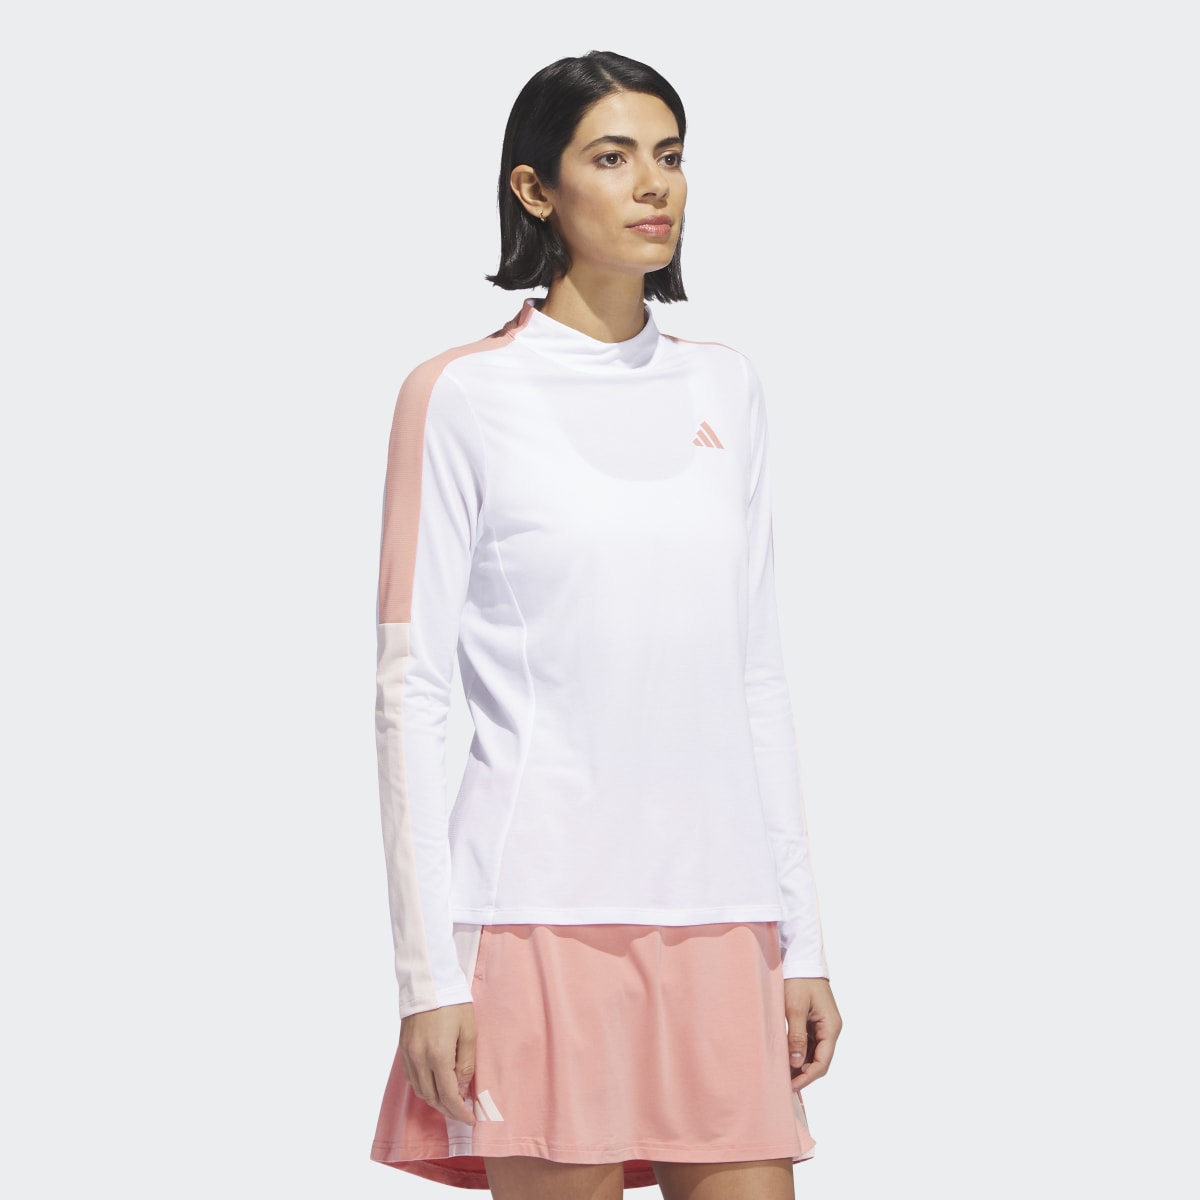 Adidas Made With Nature Mock Neck Long-Sleeve Top. 4